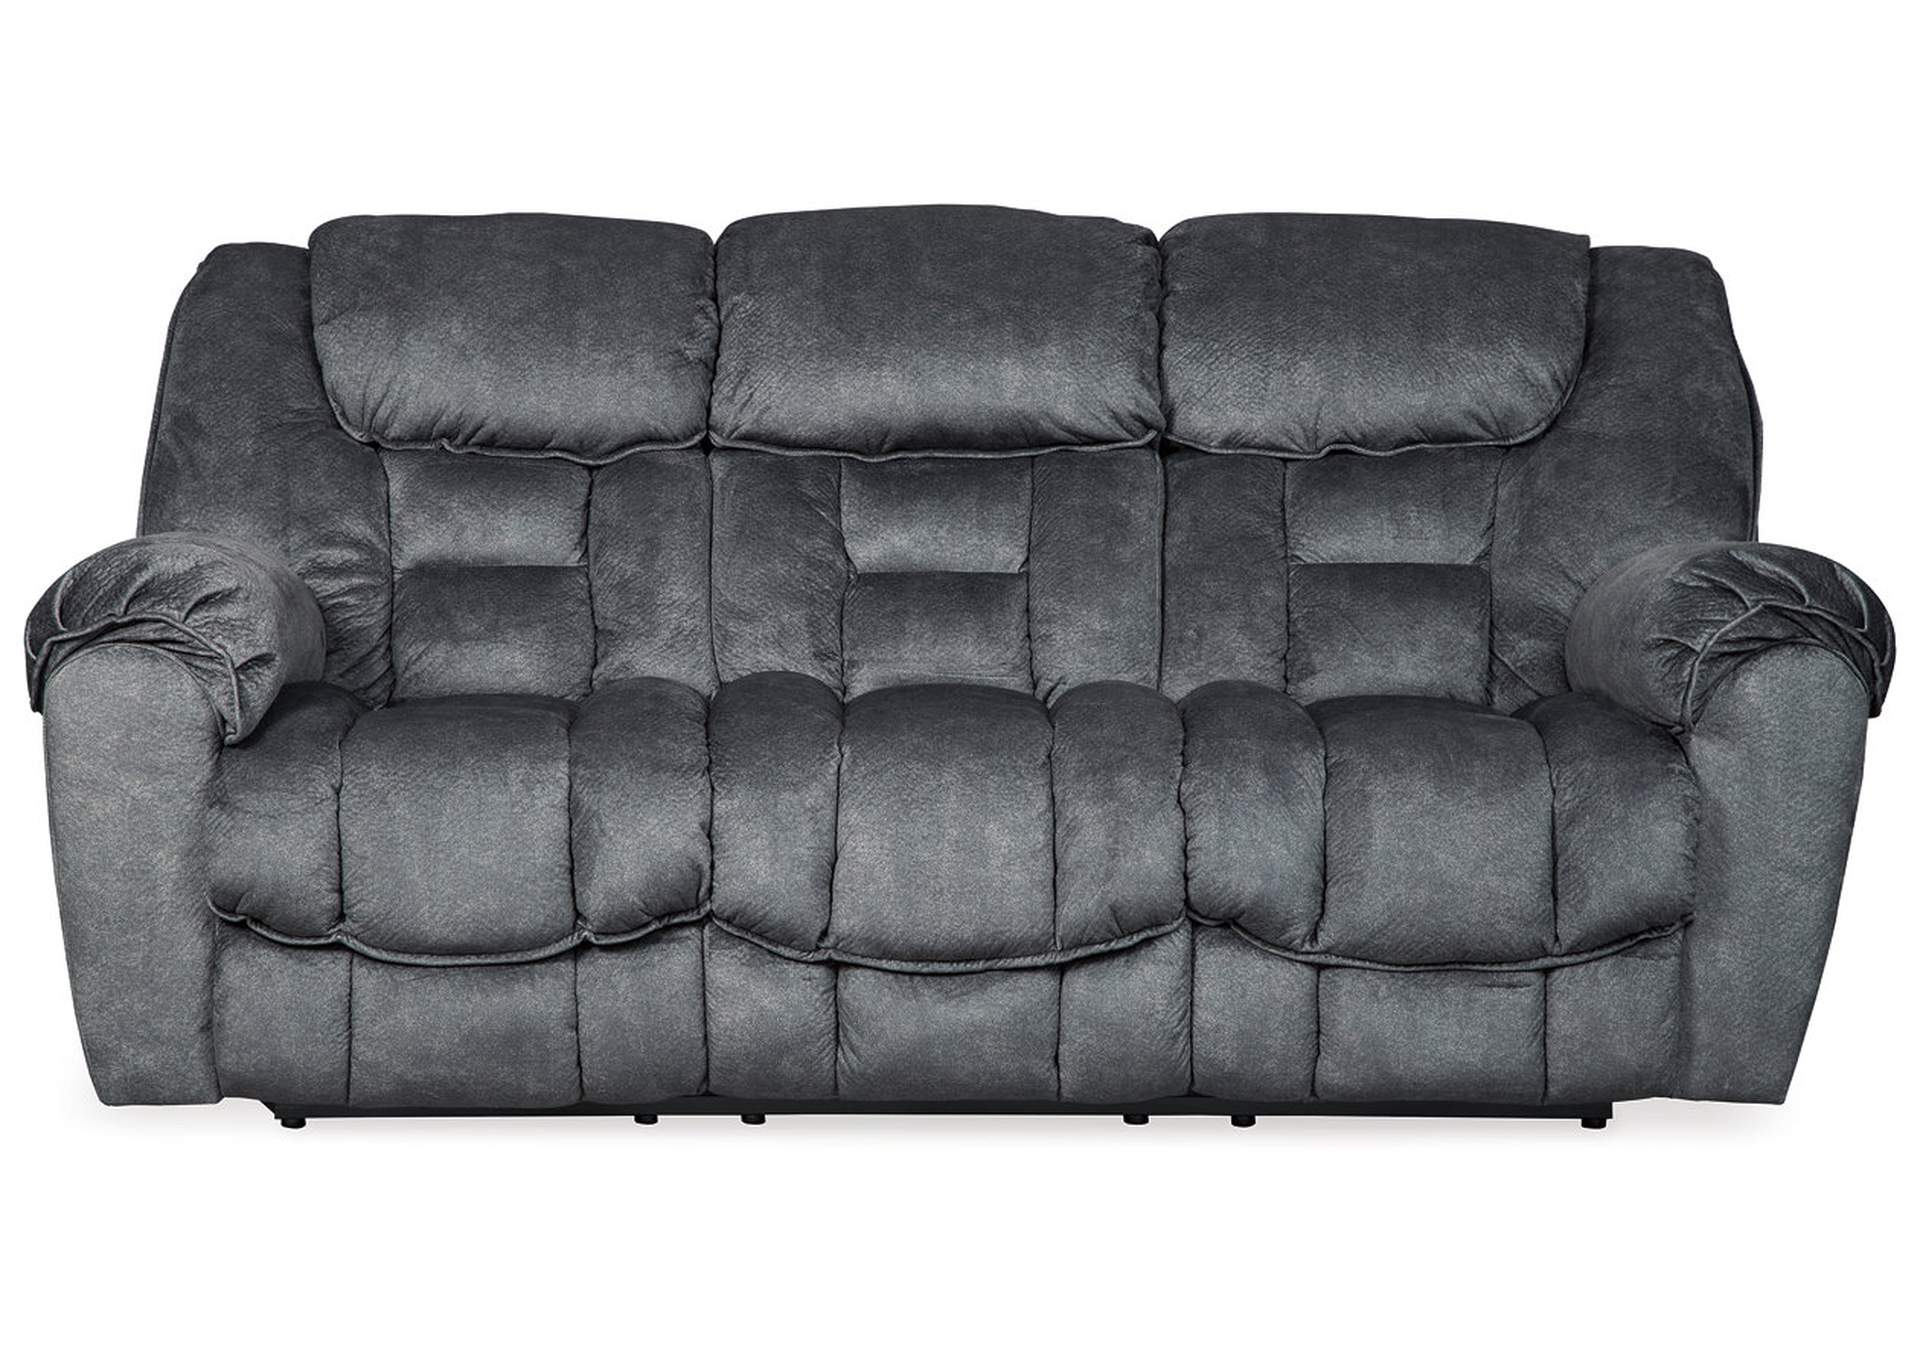 Capehorn Sofa and Loveseat,Signature Design By Ashley